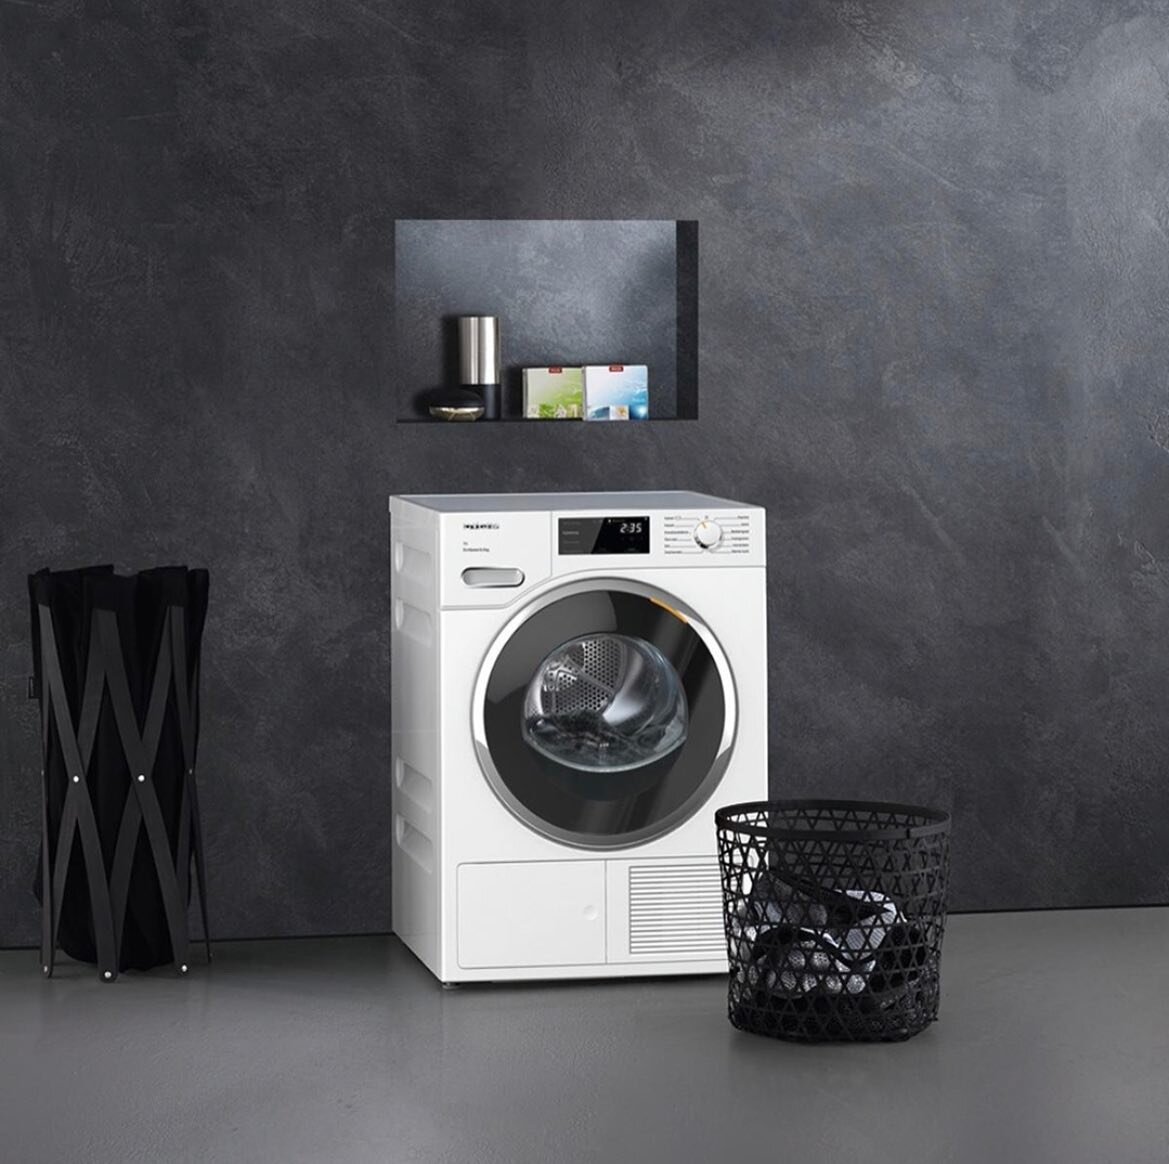 Miele dryers will make your daily life easier.